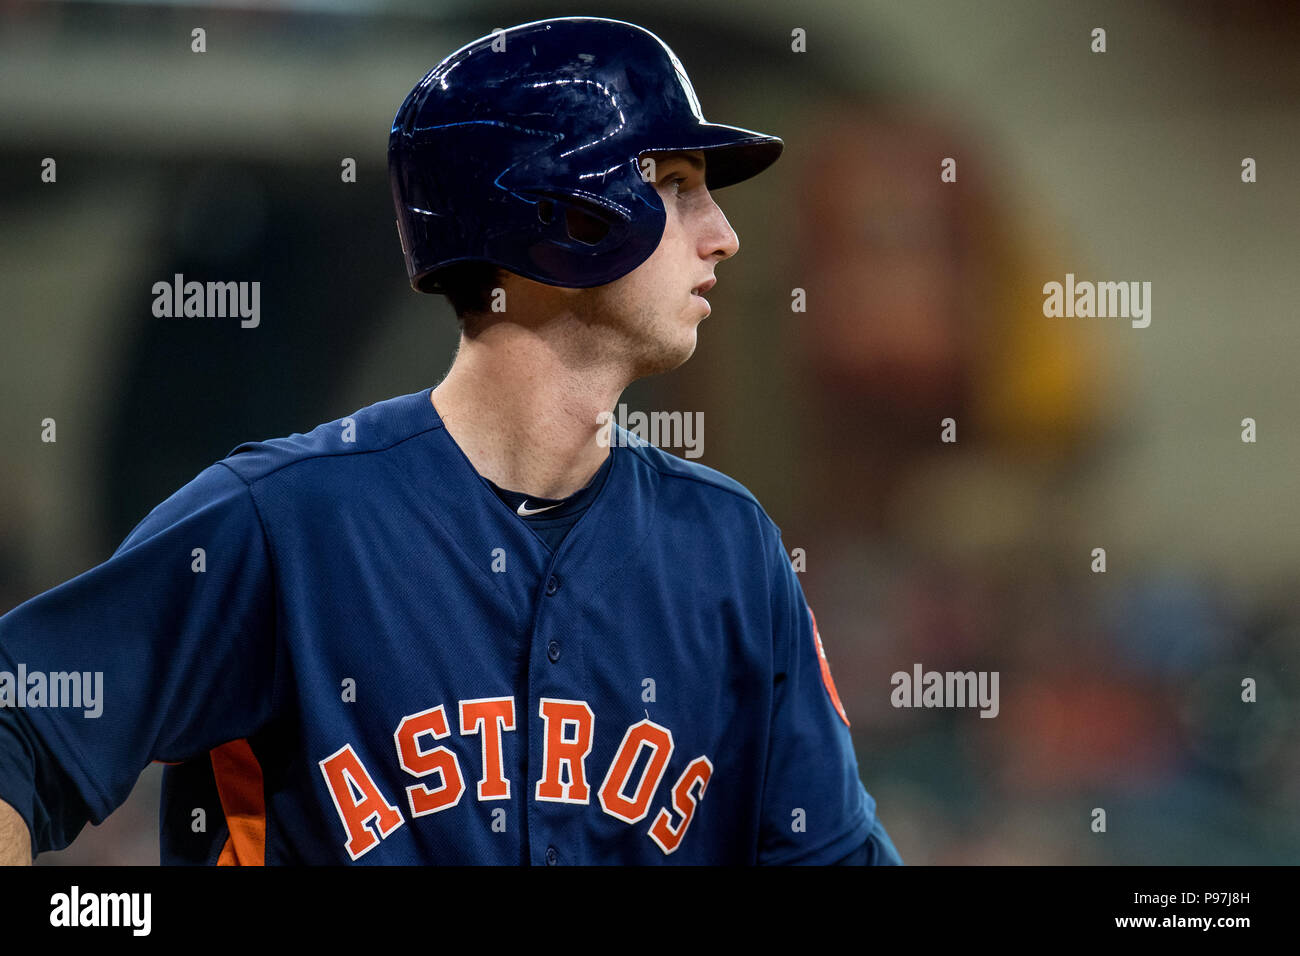 Houston, TX, USA. 15th July, 2018. Houston Astros pinch hitter Kyle Tucker (3) during a Major League Baseball game between the Houston Astros and the Detroit Tigers at Minute Maid Park in Houston, TX. The Tigers won the game 6 to 3.Trask Smith/CSM/Alamy Live News Stock Photo